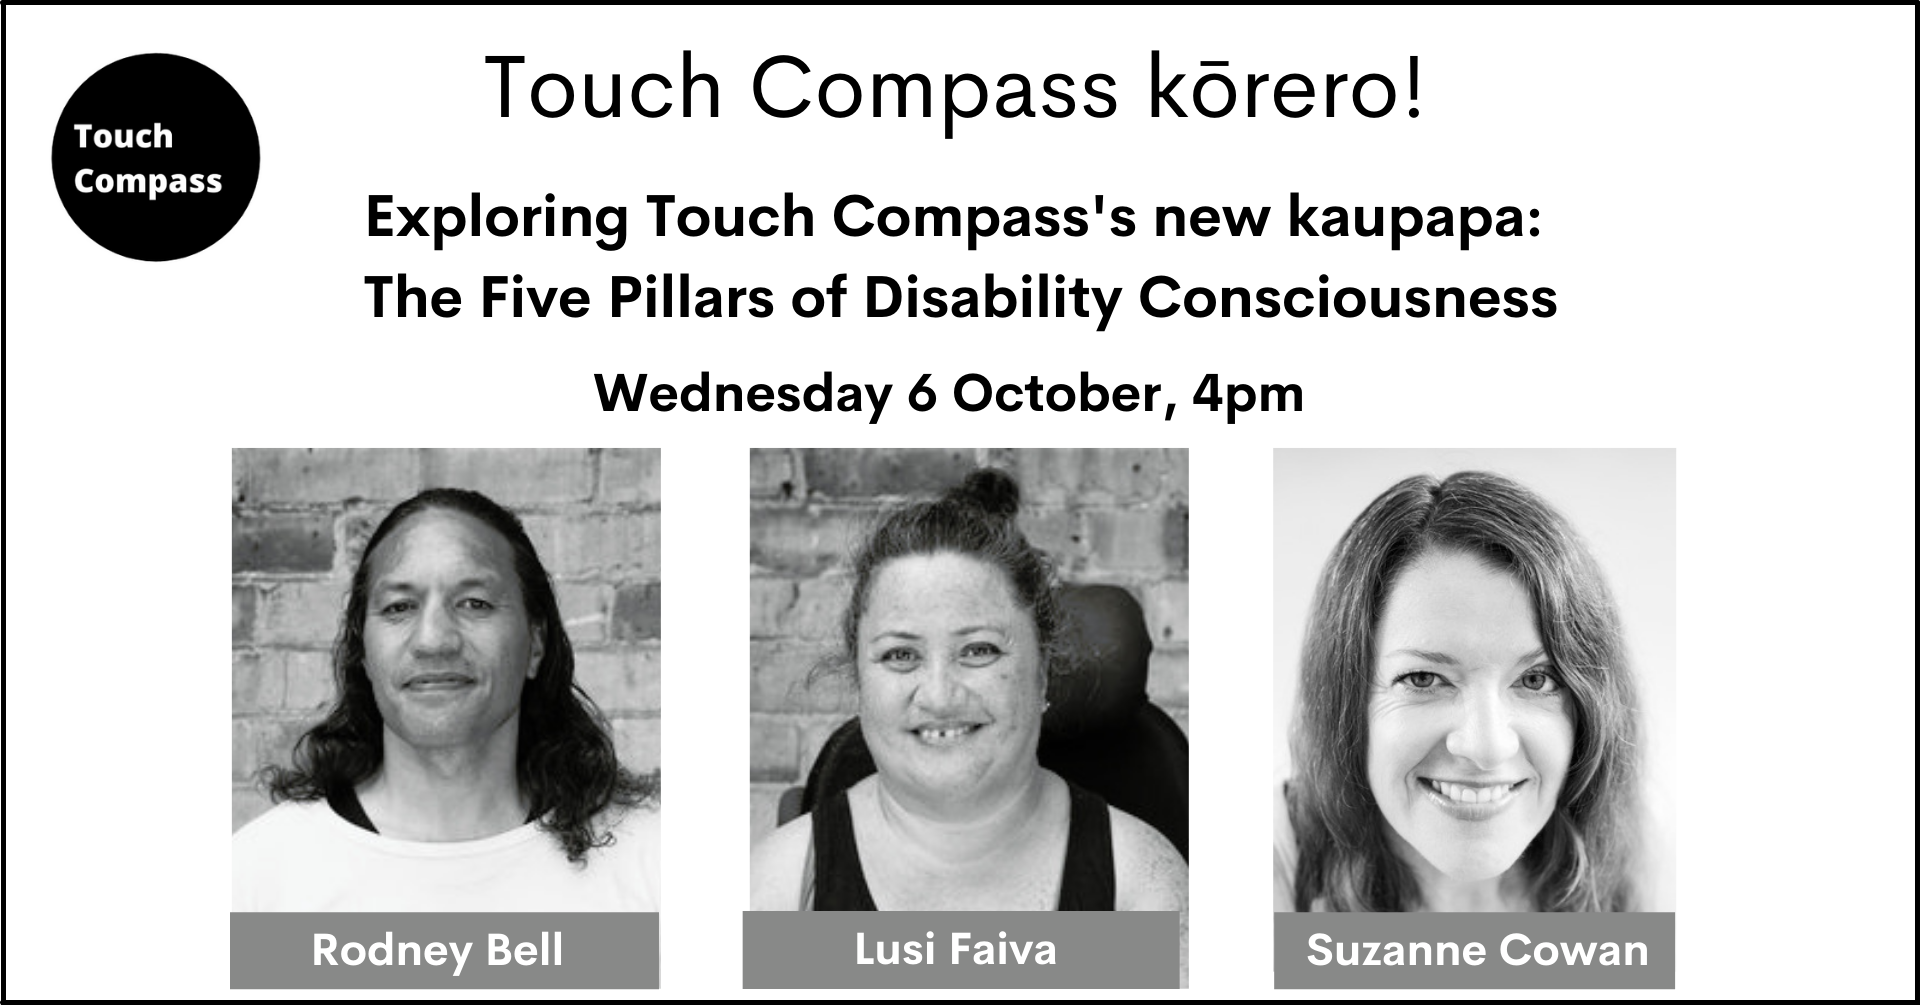 Poster of Exploring Touch Compass's new kaupapa: The Five Pillars of Disability Consciousness, showing Touch Compass's Artistic Direction Panel - Rodney Bell, Lusi Faiva, Suzanne Cowan.